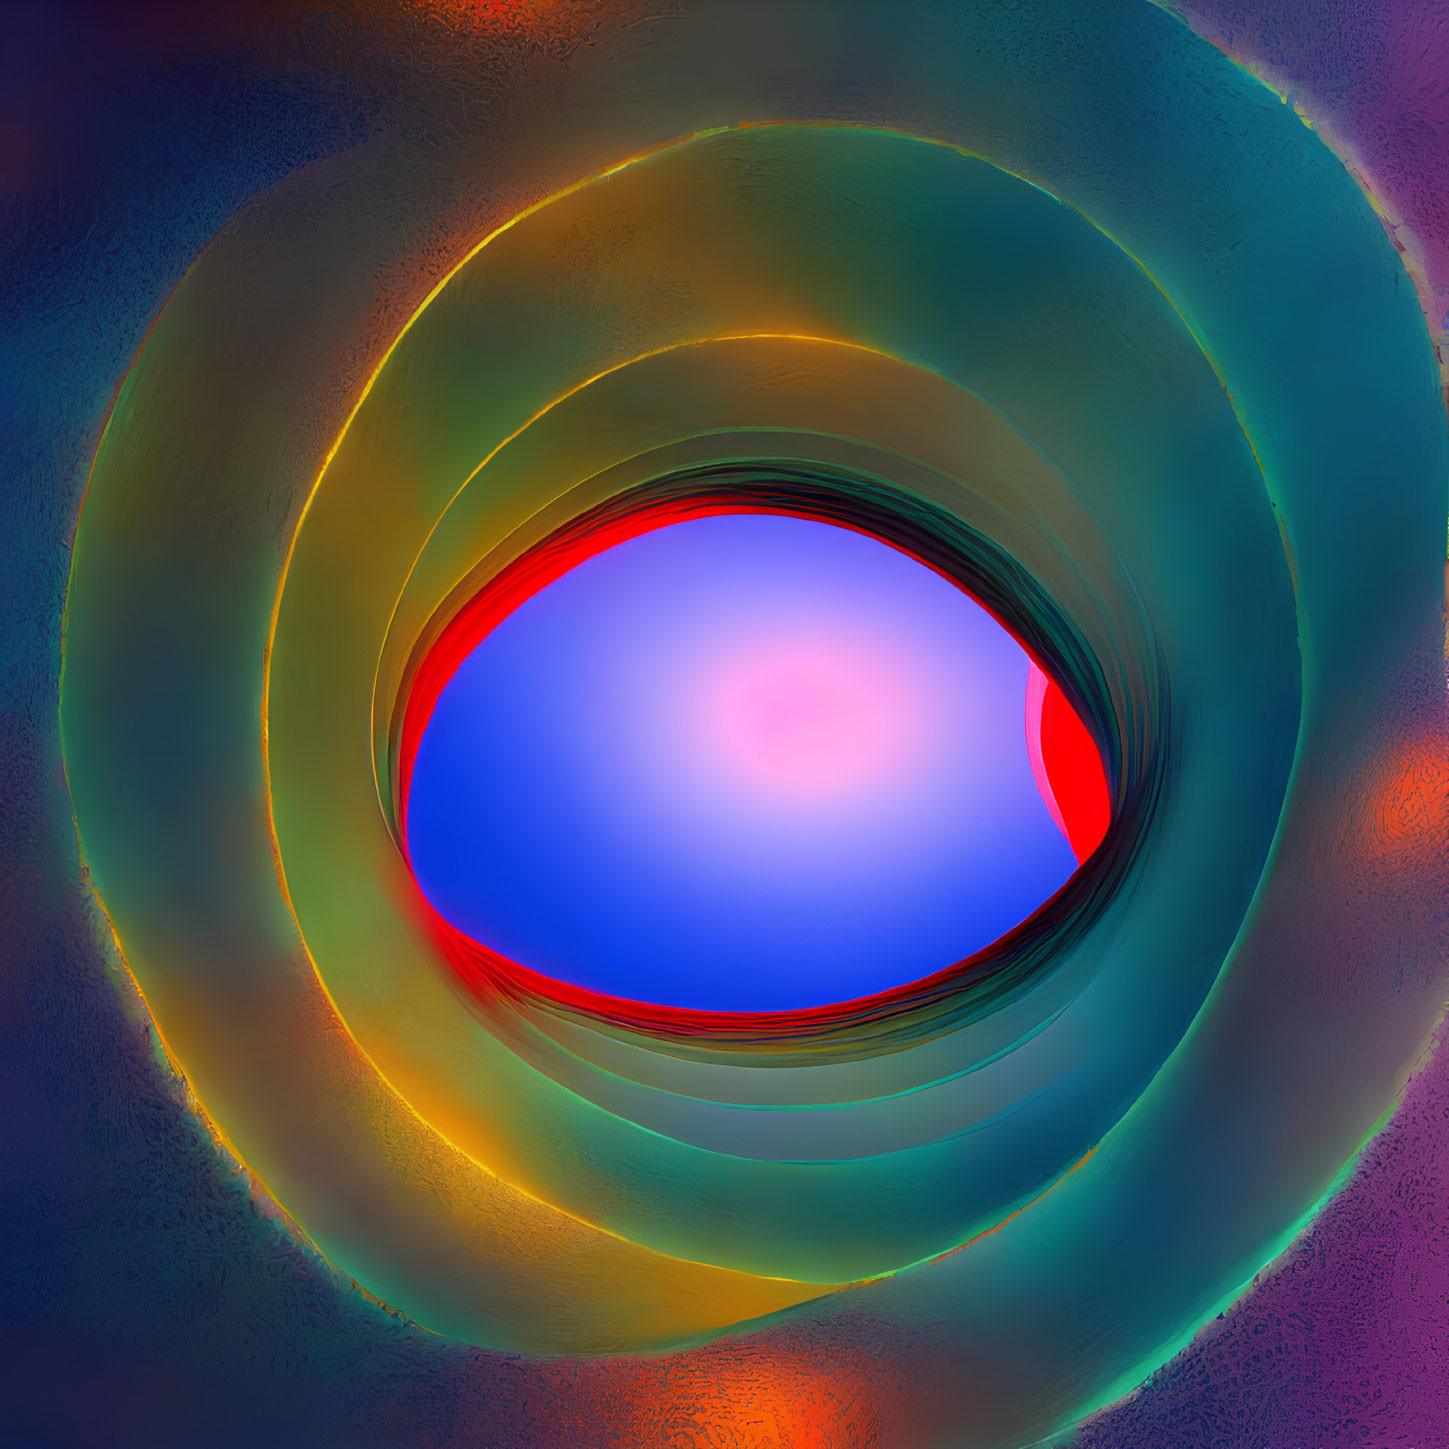 Layered concentric shapes in blue, red, and yellow tones on textured background